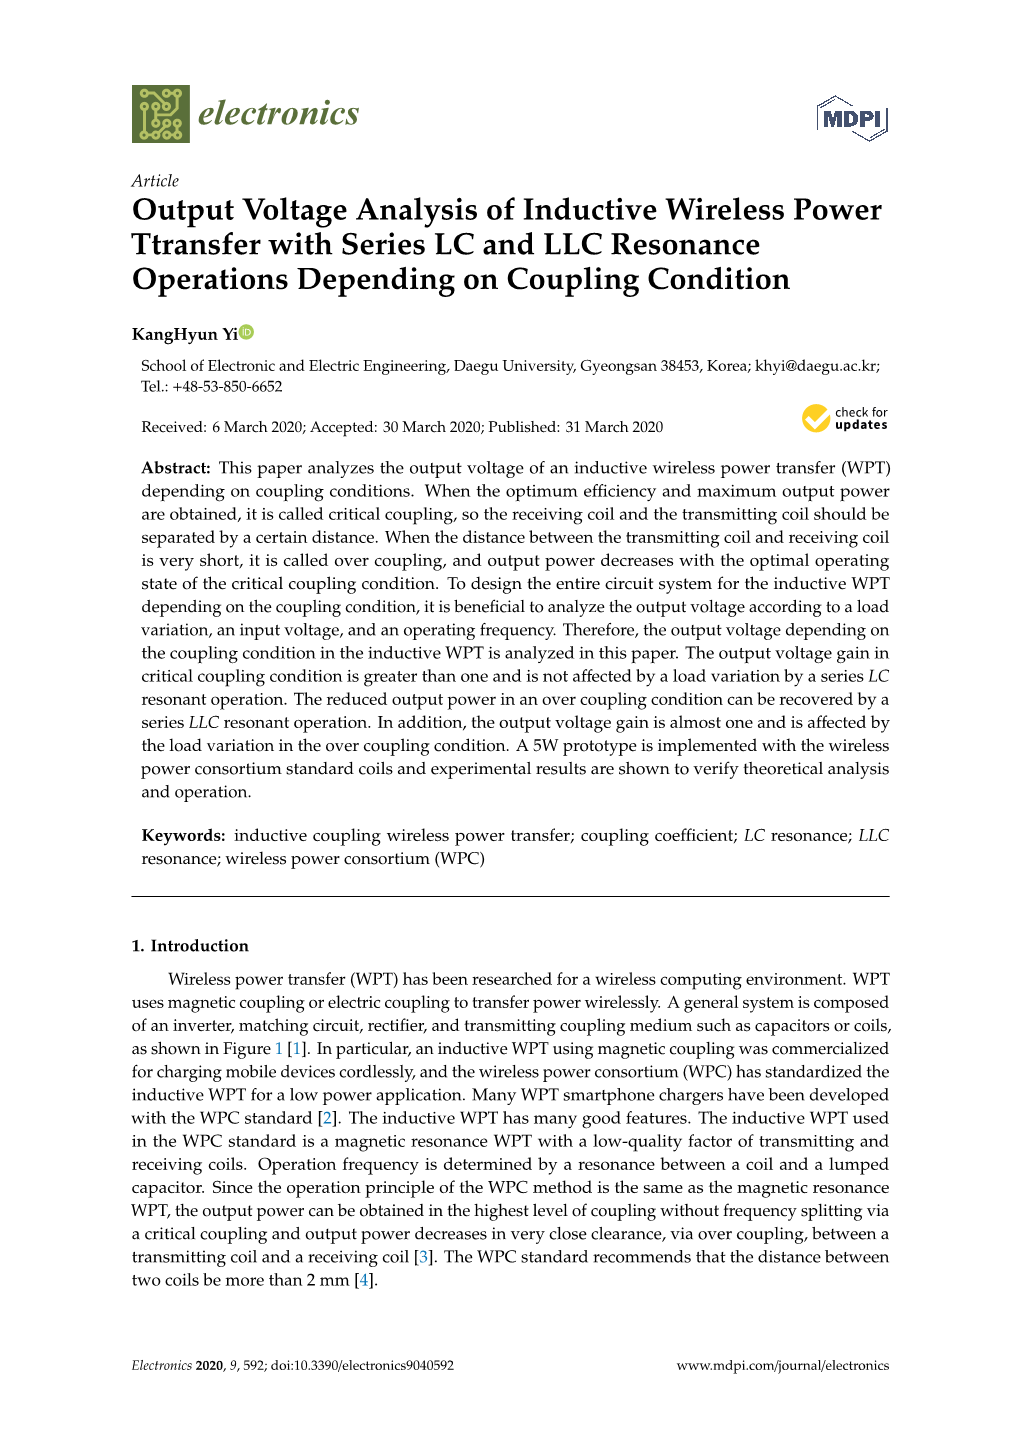 Output Voltage Analysis of Inductive Wireless Power Ttransfer with Series LC and LLC Resonance Operations Depending on Coupling Condition